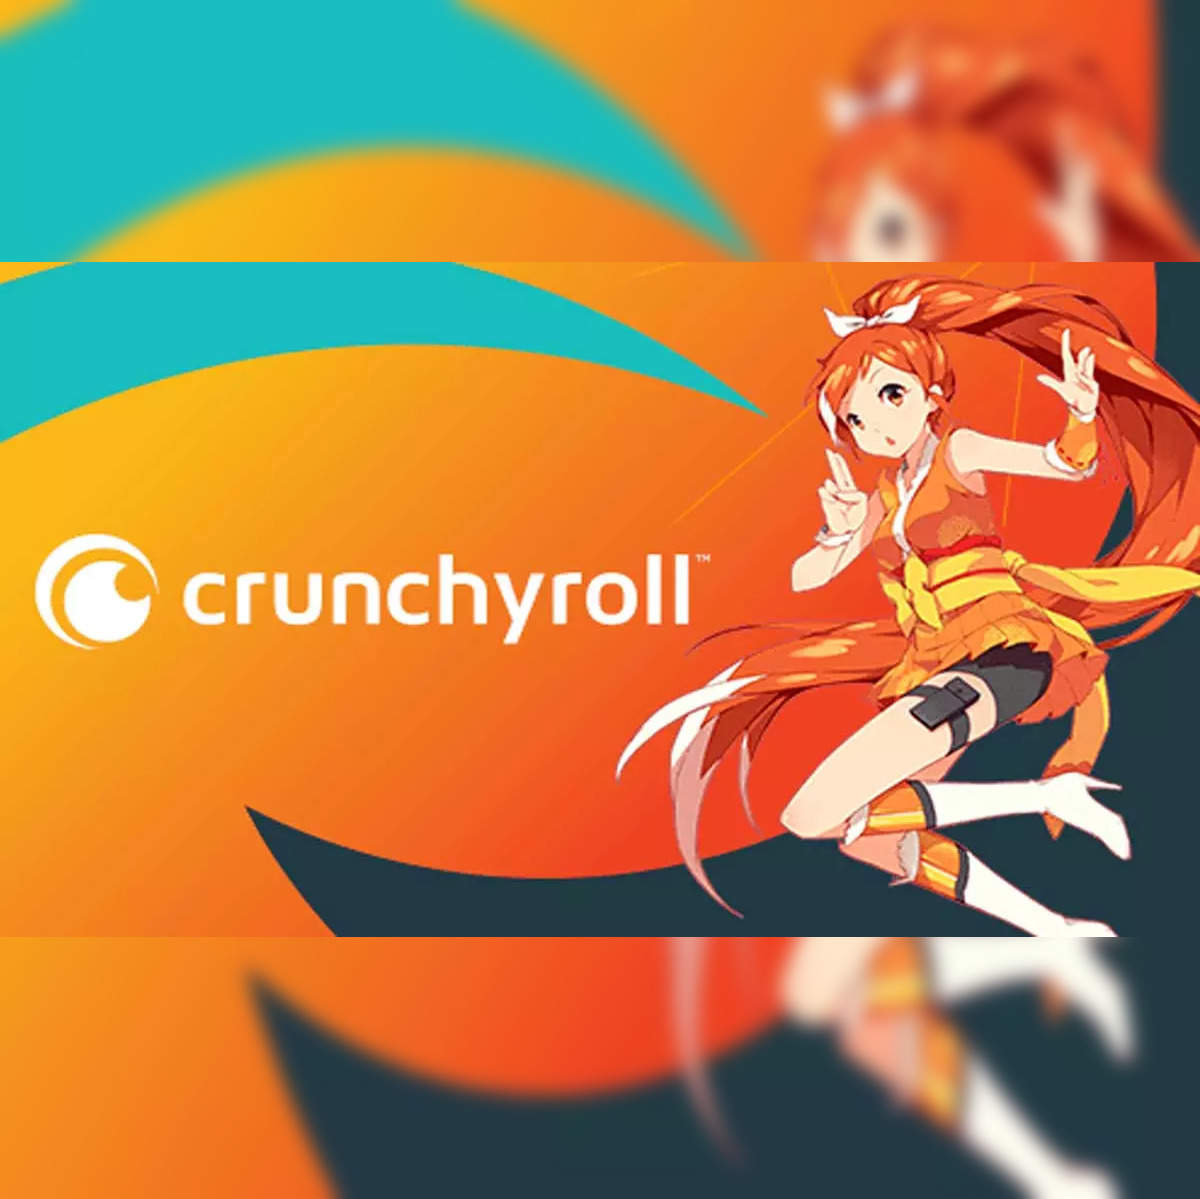 Makkale, we have gathered here to celebrate the successfully reach of anime  in India. Crunchyroll adds Tamil language in audio option : r/Chennai